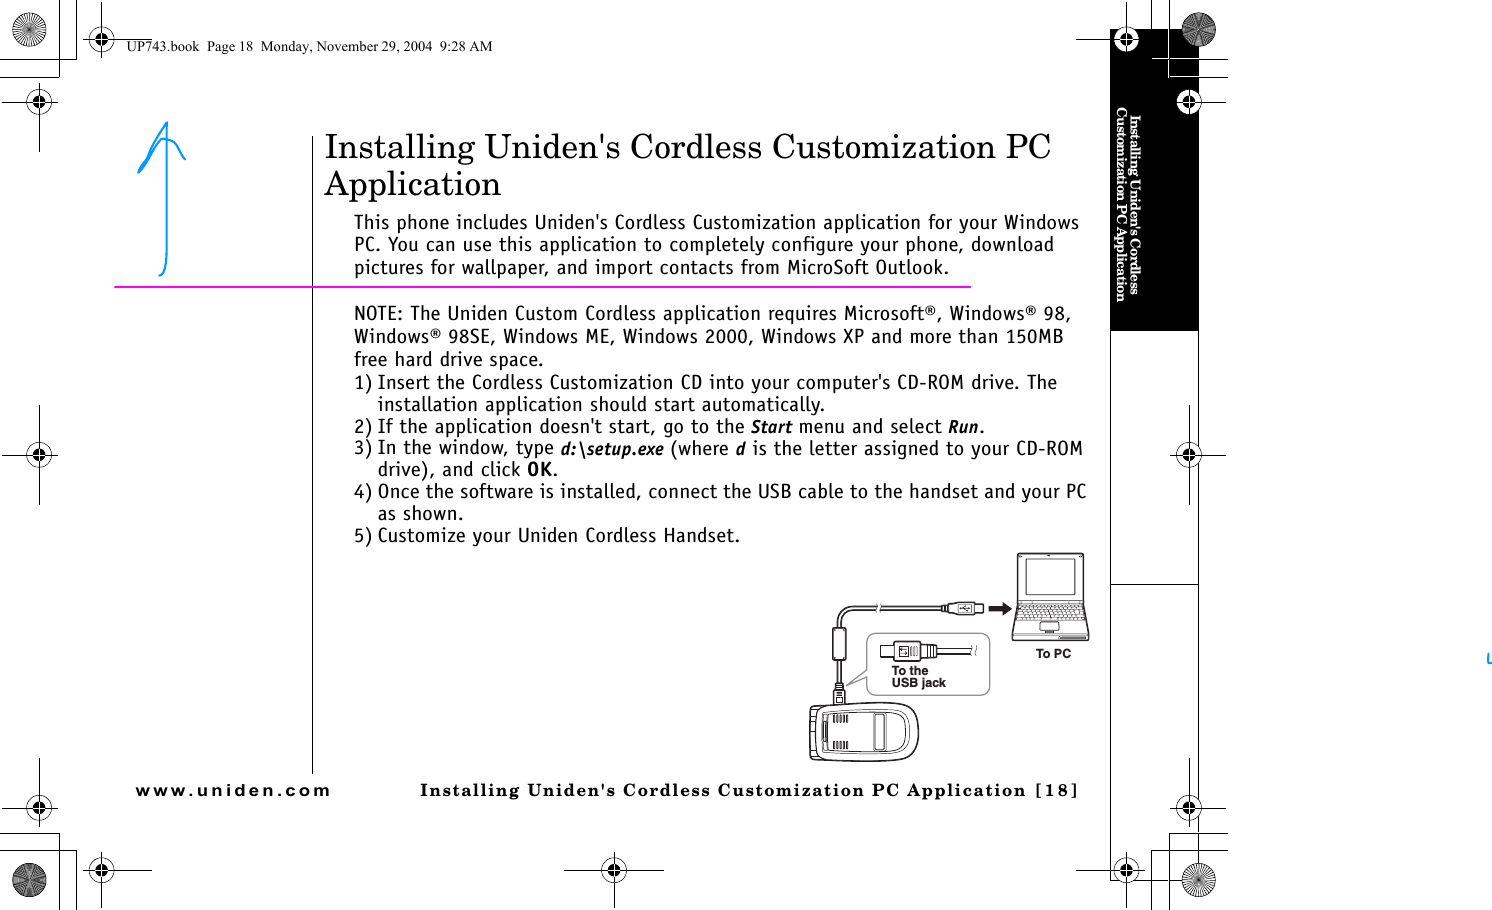 Installing Uniden&apos;s Cordless Customization PC ApplicationInstalling Uniden&apos;s Cordless Customization PC Application [18]www.uniden.comInstalling Uniden&apos;s Cordless Customization PC ApplicationThis phone includes Uniden&apos;s Cordless Customization application for your Windows PC. You can use this application to completely configure your phone, download pictures for wallpaper, and import contacts from MicroSoft Outlook. NOTE: The Uniden Custom Cordless application requires Microsoft®, Windows® 98, Windows® 98SE, Windows ME, Windows 2000, Windows XP and more than 150MB free hard drive space.1) Insert the Cordless Customization CD into your computer&apos;s CD-ROM drive. The installation application should start automatically.2) If the application doesn&apos;t start, go to the Start menu and select Run.3) In the window, type d:\setup.exe (where d is the letter assigned to your CD-ROM drive), and click OK.4) Once the software is installed, connect the USB cable to the handset and your PC as shown.5) Customize your Uniden Cordless Handset. To PCTo theUSB jackUP743.book  Page 18  Monday, November 29, 2004  9:28 AM